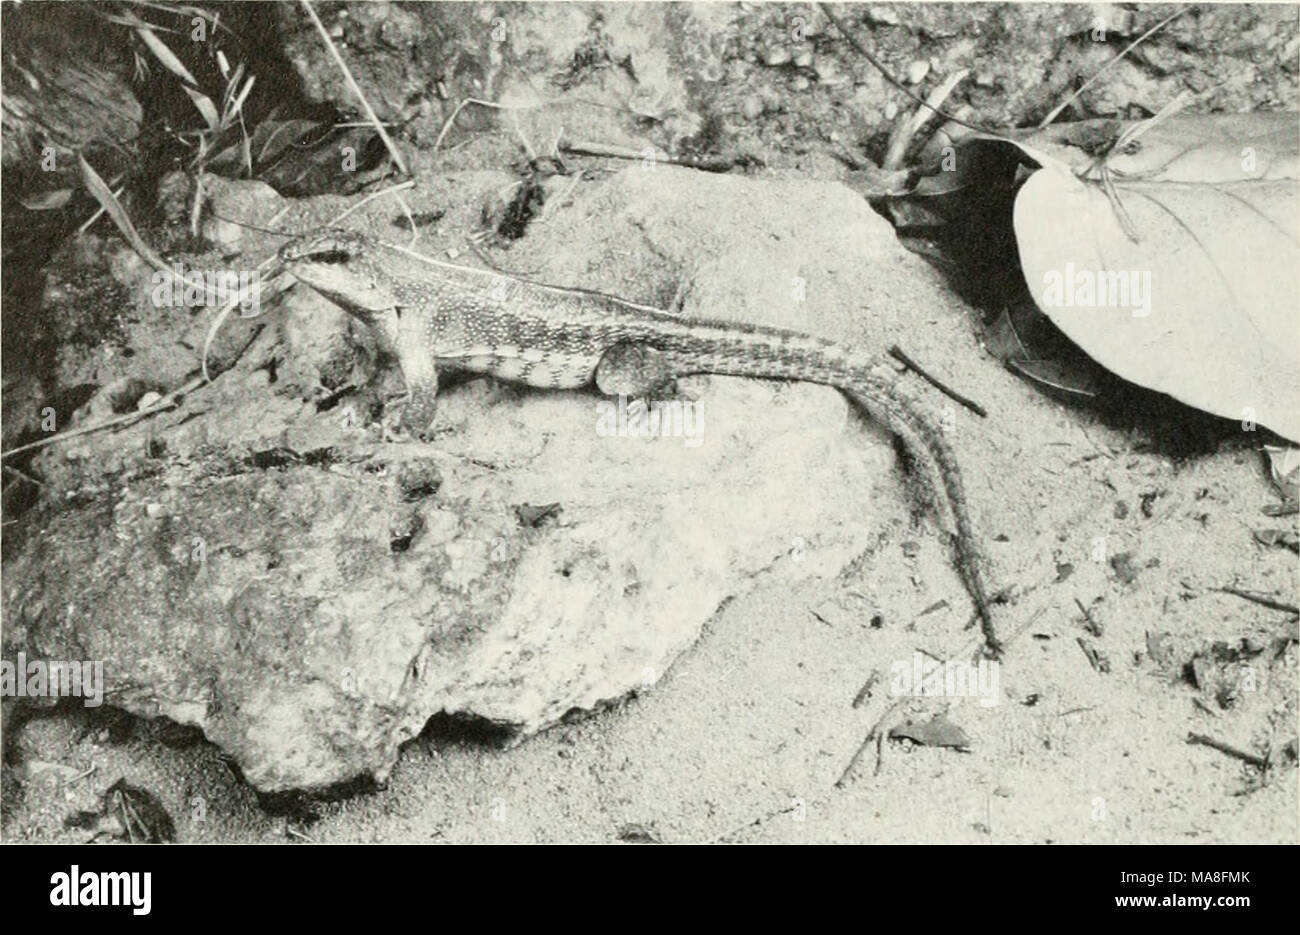 . The ecological impact of man on the south Florida herpetofauna . FiGURE 27. Red-Sided Curly-tailed Lizard (Leiocephalus schreibersi). (LP) Stated that the population was no longer extant, but King and Krak- auer (1966) indicated that the lizard had been seen near the aquarium at Mallory Square on the western end of the island. We have a specimen collected on Stock Island in 1977, and Love (1978) recently reported collecting a specimen in a vacant lot in Key West. Sphaerodactylus elegans. â SQ']nQ:gtr (1922) was the first to re- cord the ashy gecko (Fig. 29) from Key West. Duellman and Schwa Stock Photo